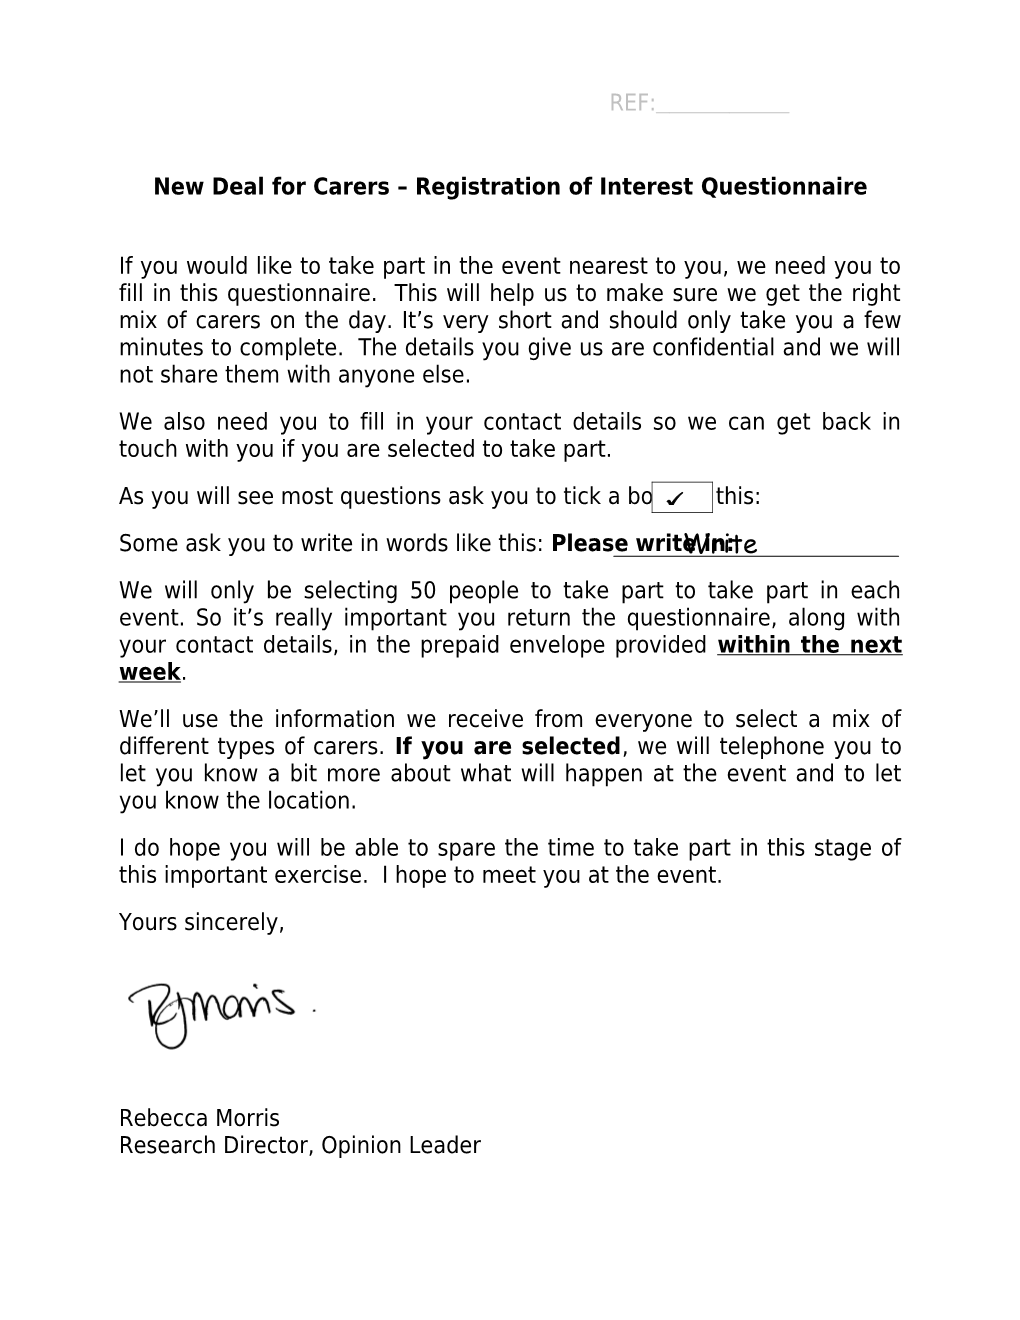 New Deal for Carers Registration of Interest Questionnaire